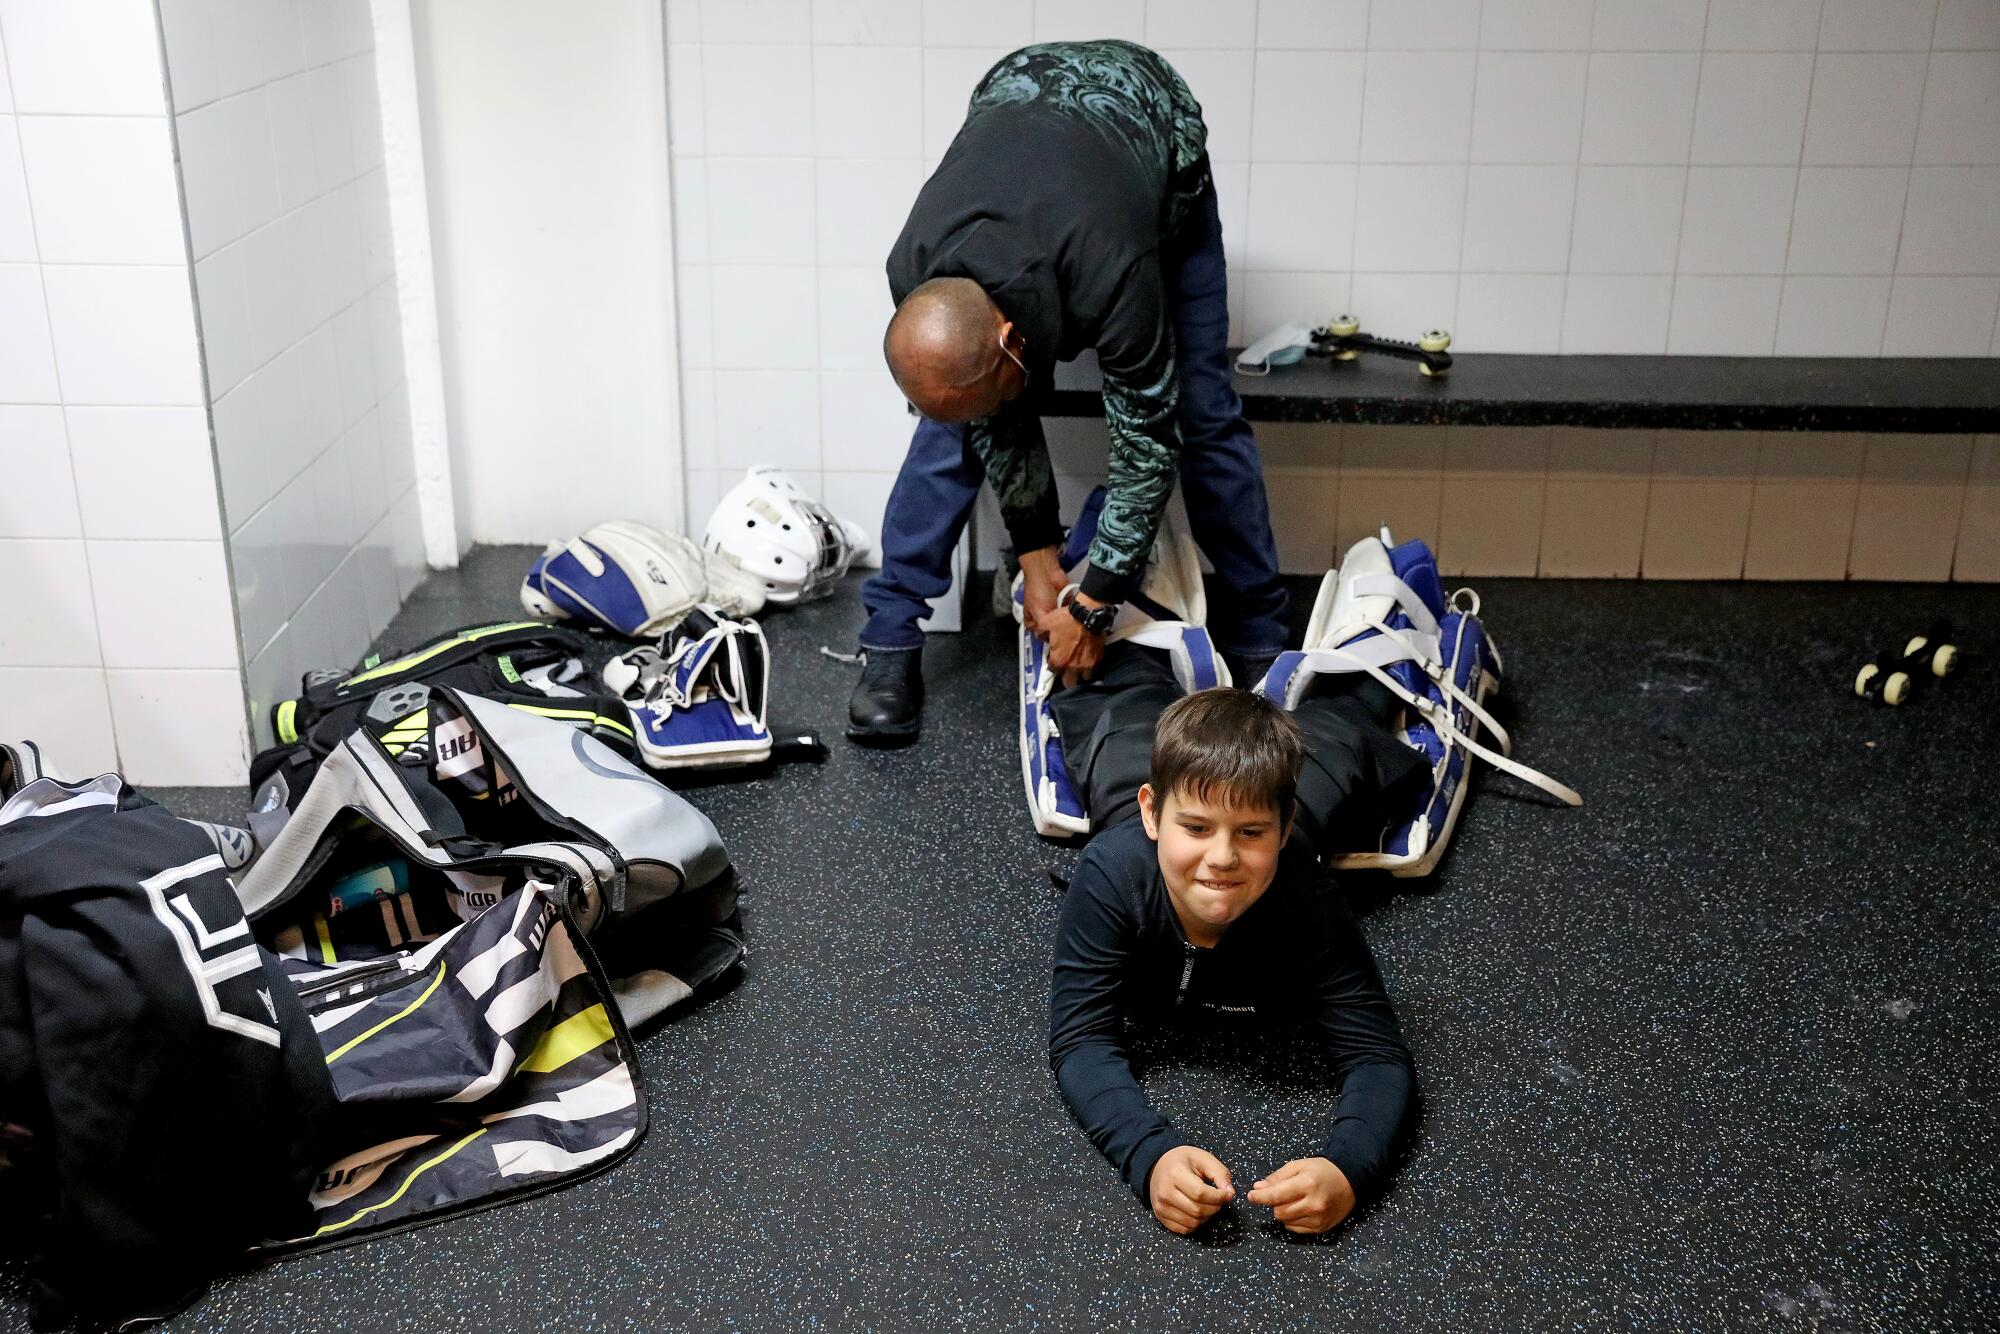  David Garcia, 10, a goalie playing for eight months with the Mexico City Jr. Kings.